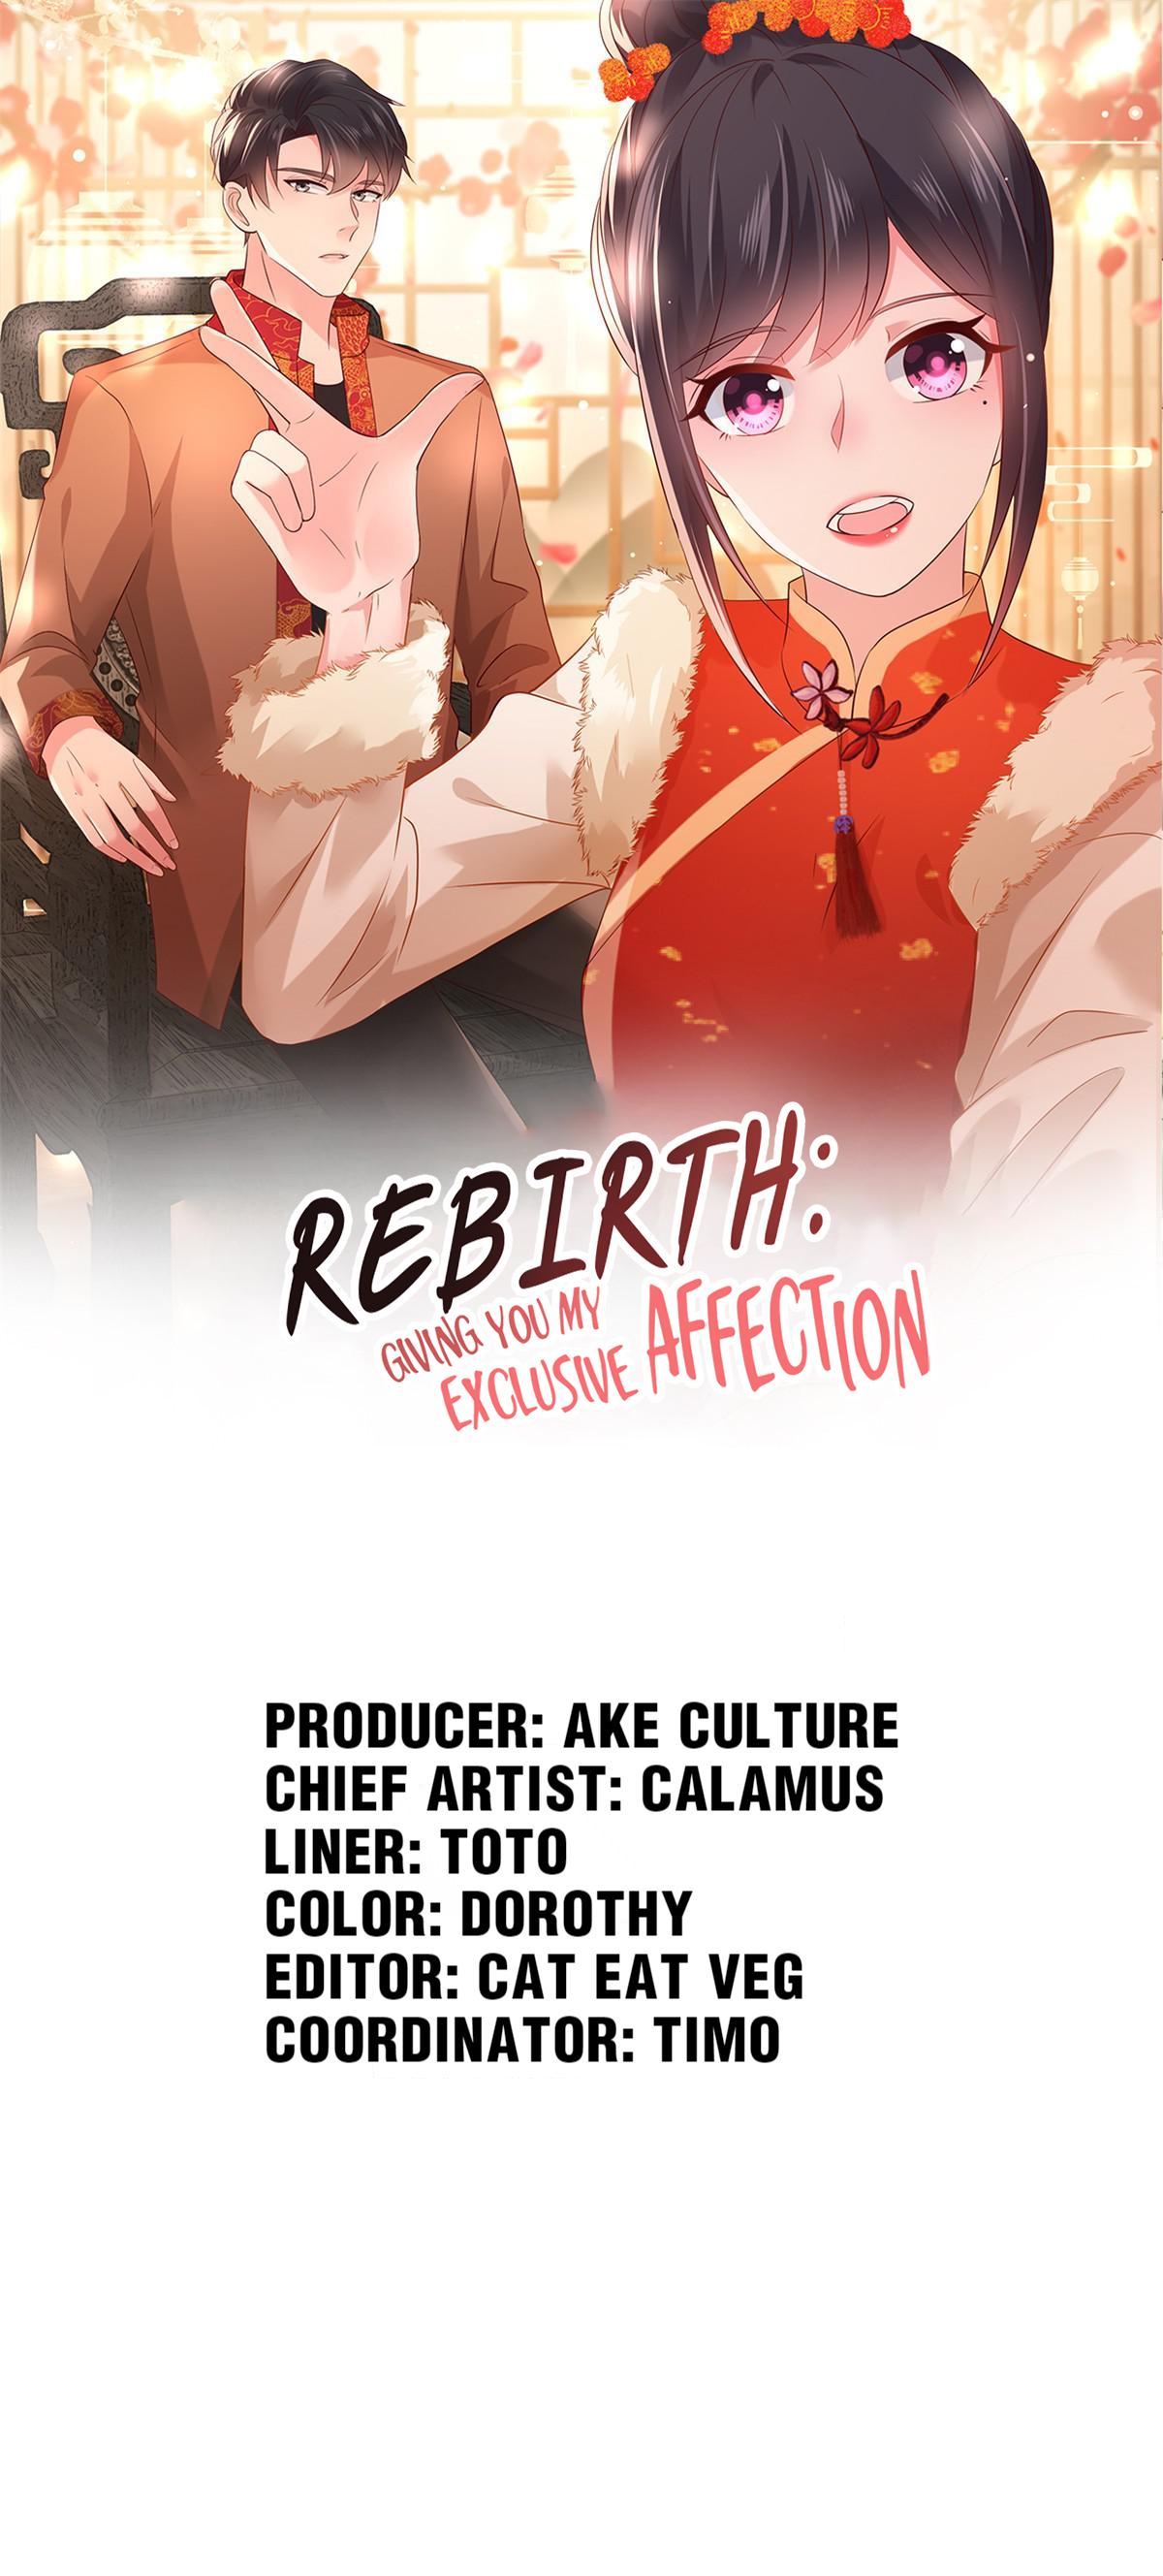 Rebirth: Giving You My Exclusive Affection 60 You're Hurt